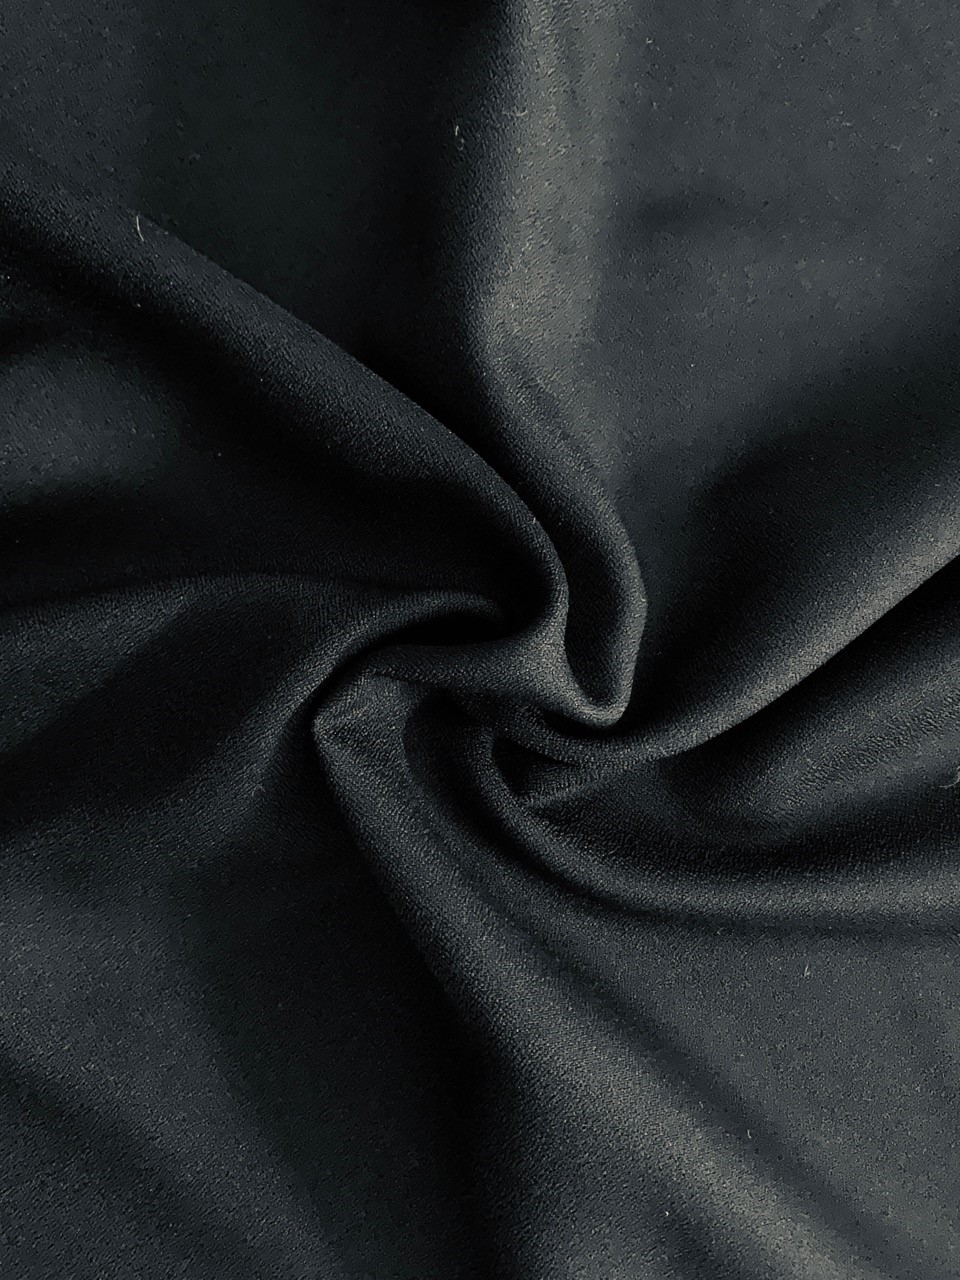 58/60 Black Crepe Back Satin Fabric By The Yard - 100% Polyester